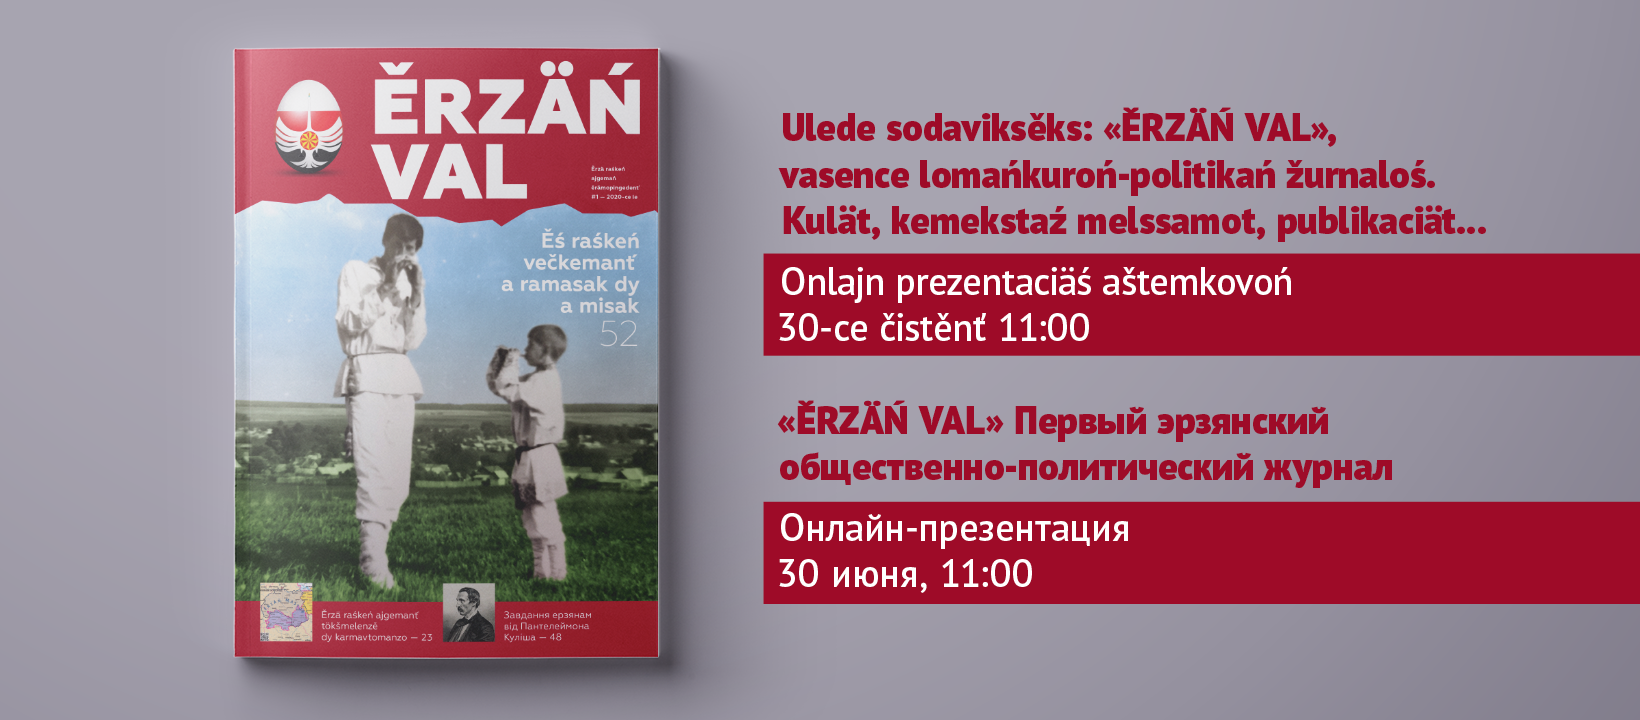 New Erzya magazine is expected to be introduced in Ukraine